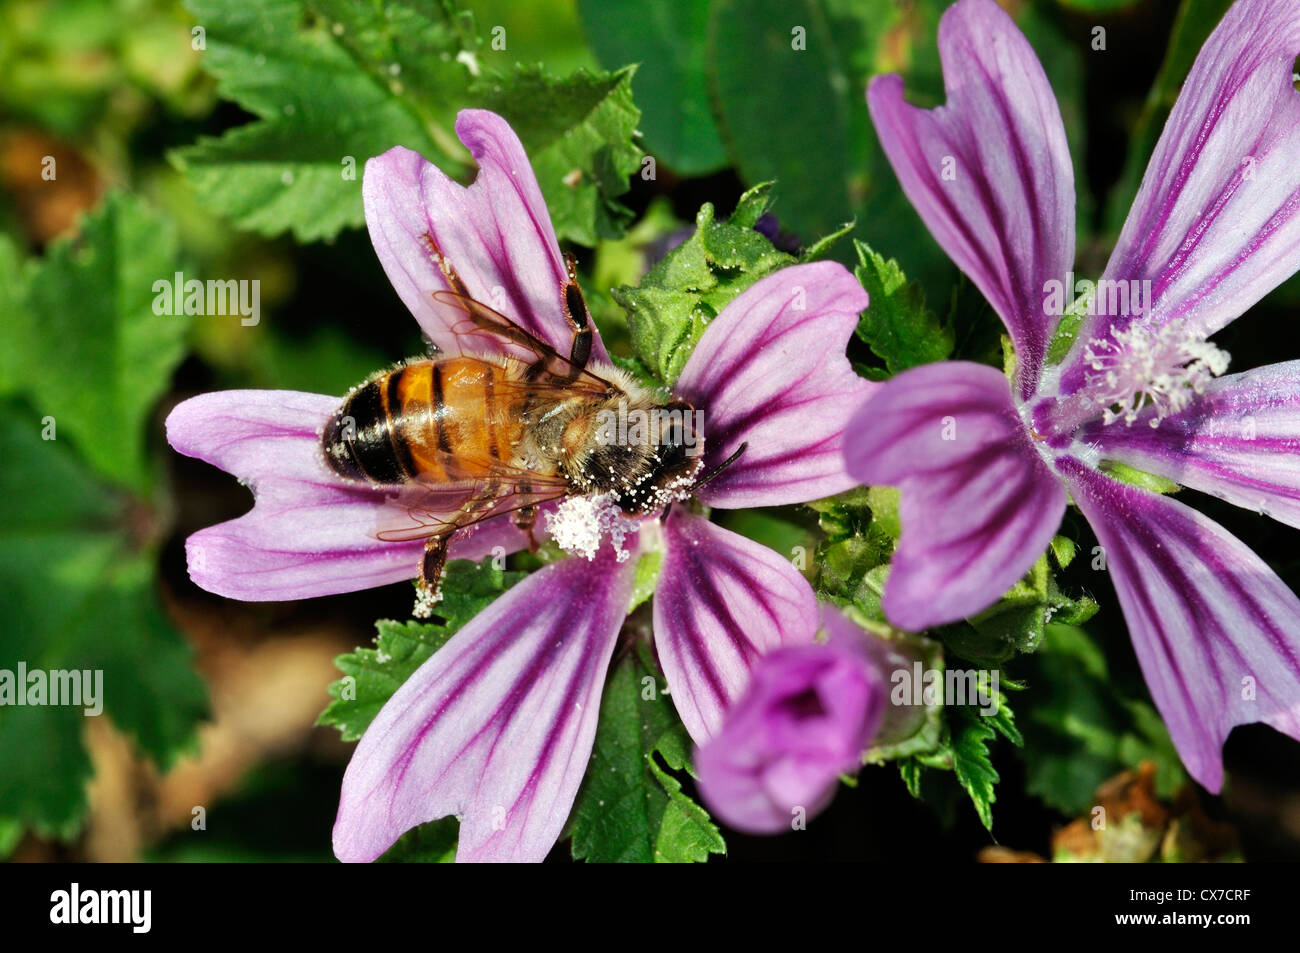 Italy, Lombardy, Bee Gathering Pollen on Mallow Flowers Stock Photo